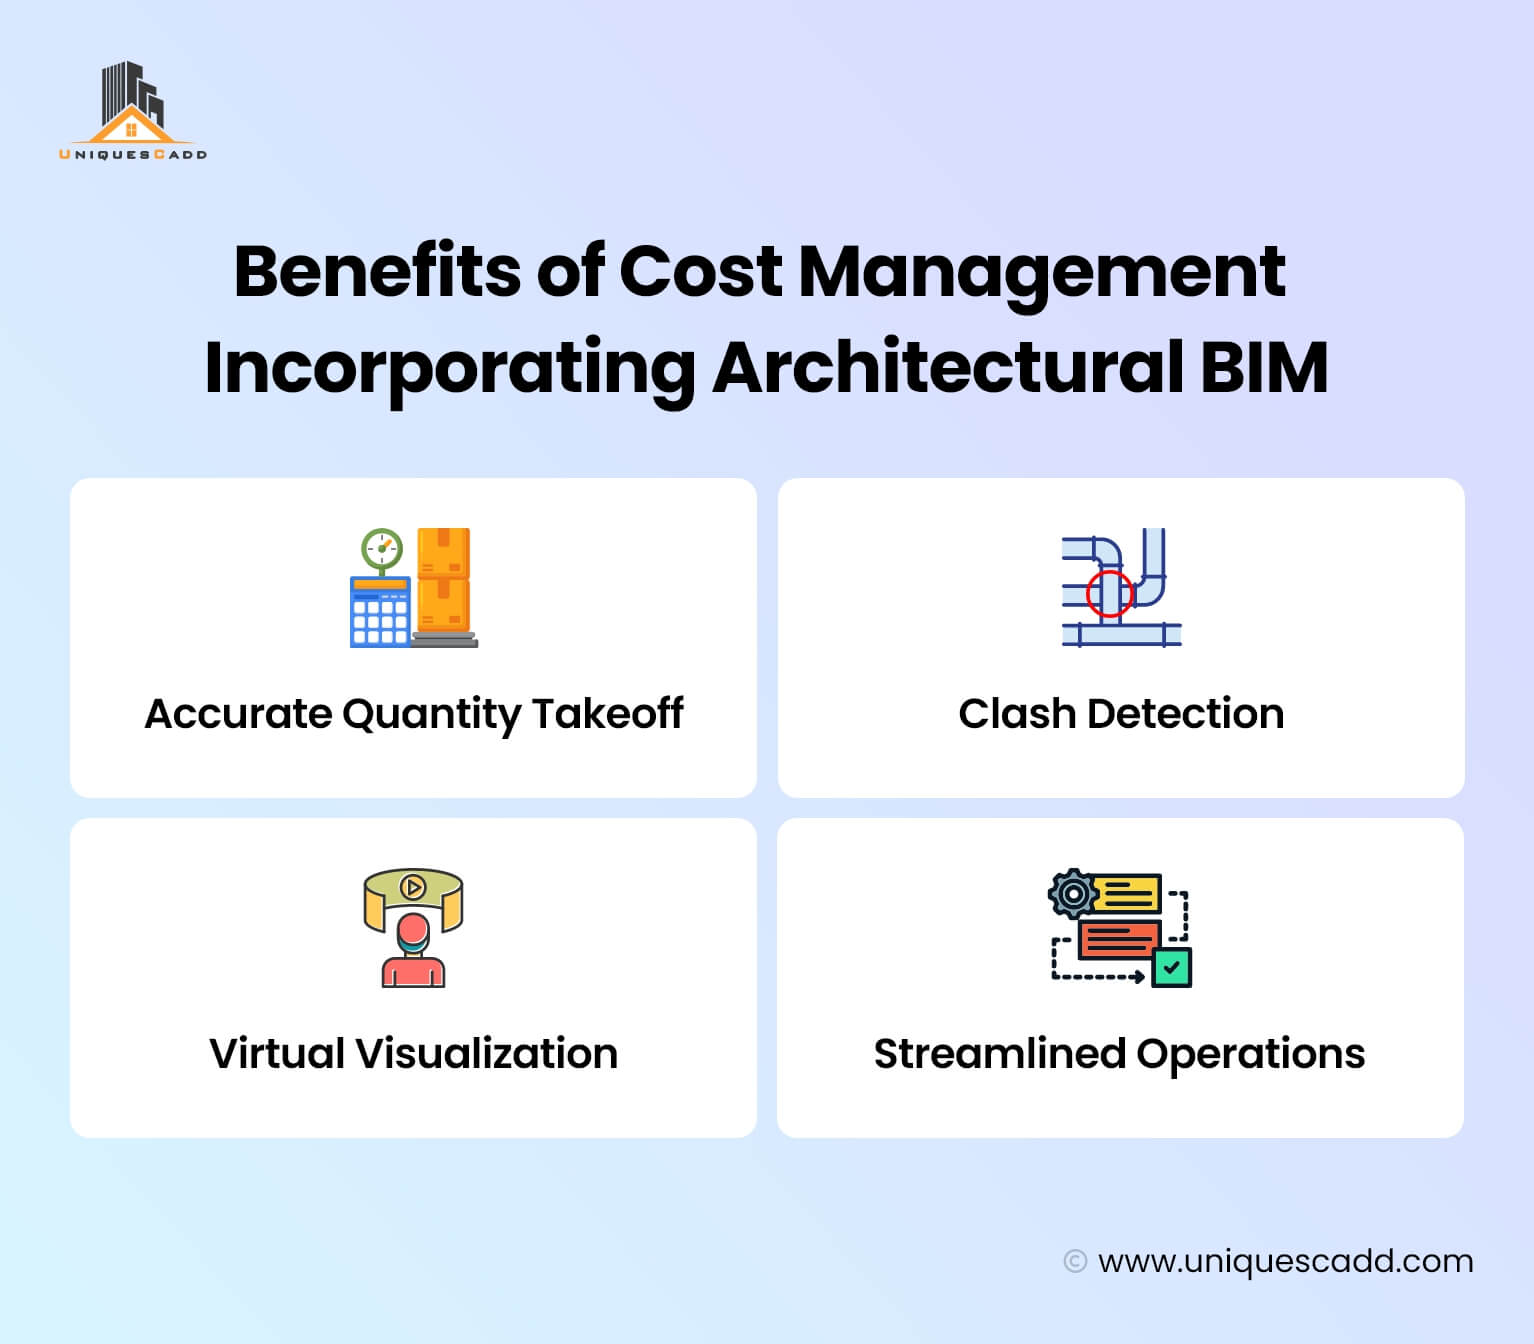 Benefits of Cost Management Incorporating Architectural BIM